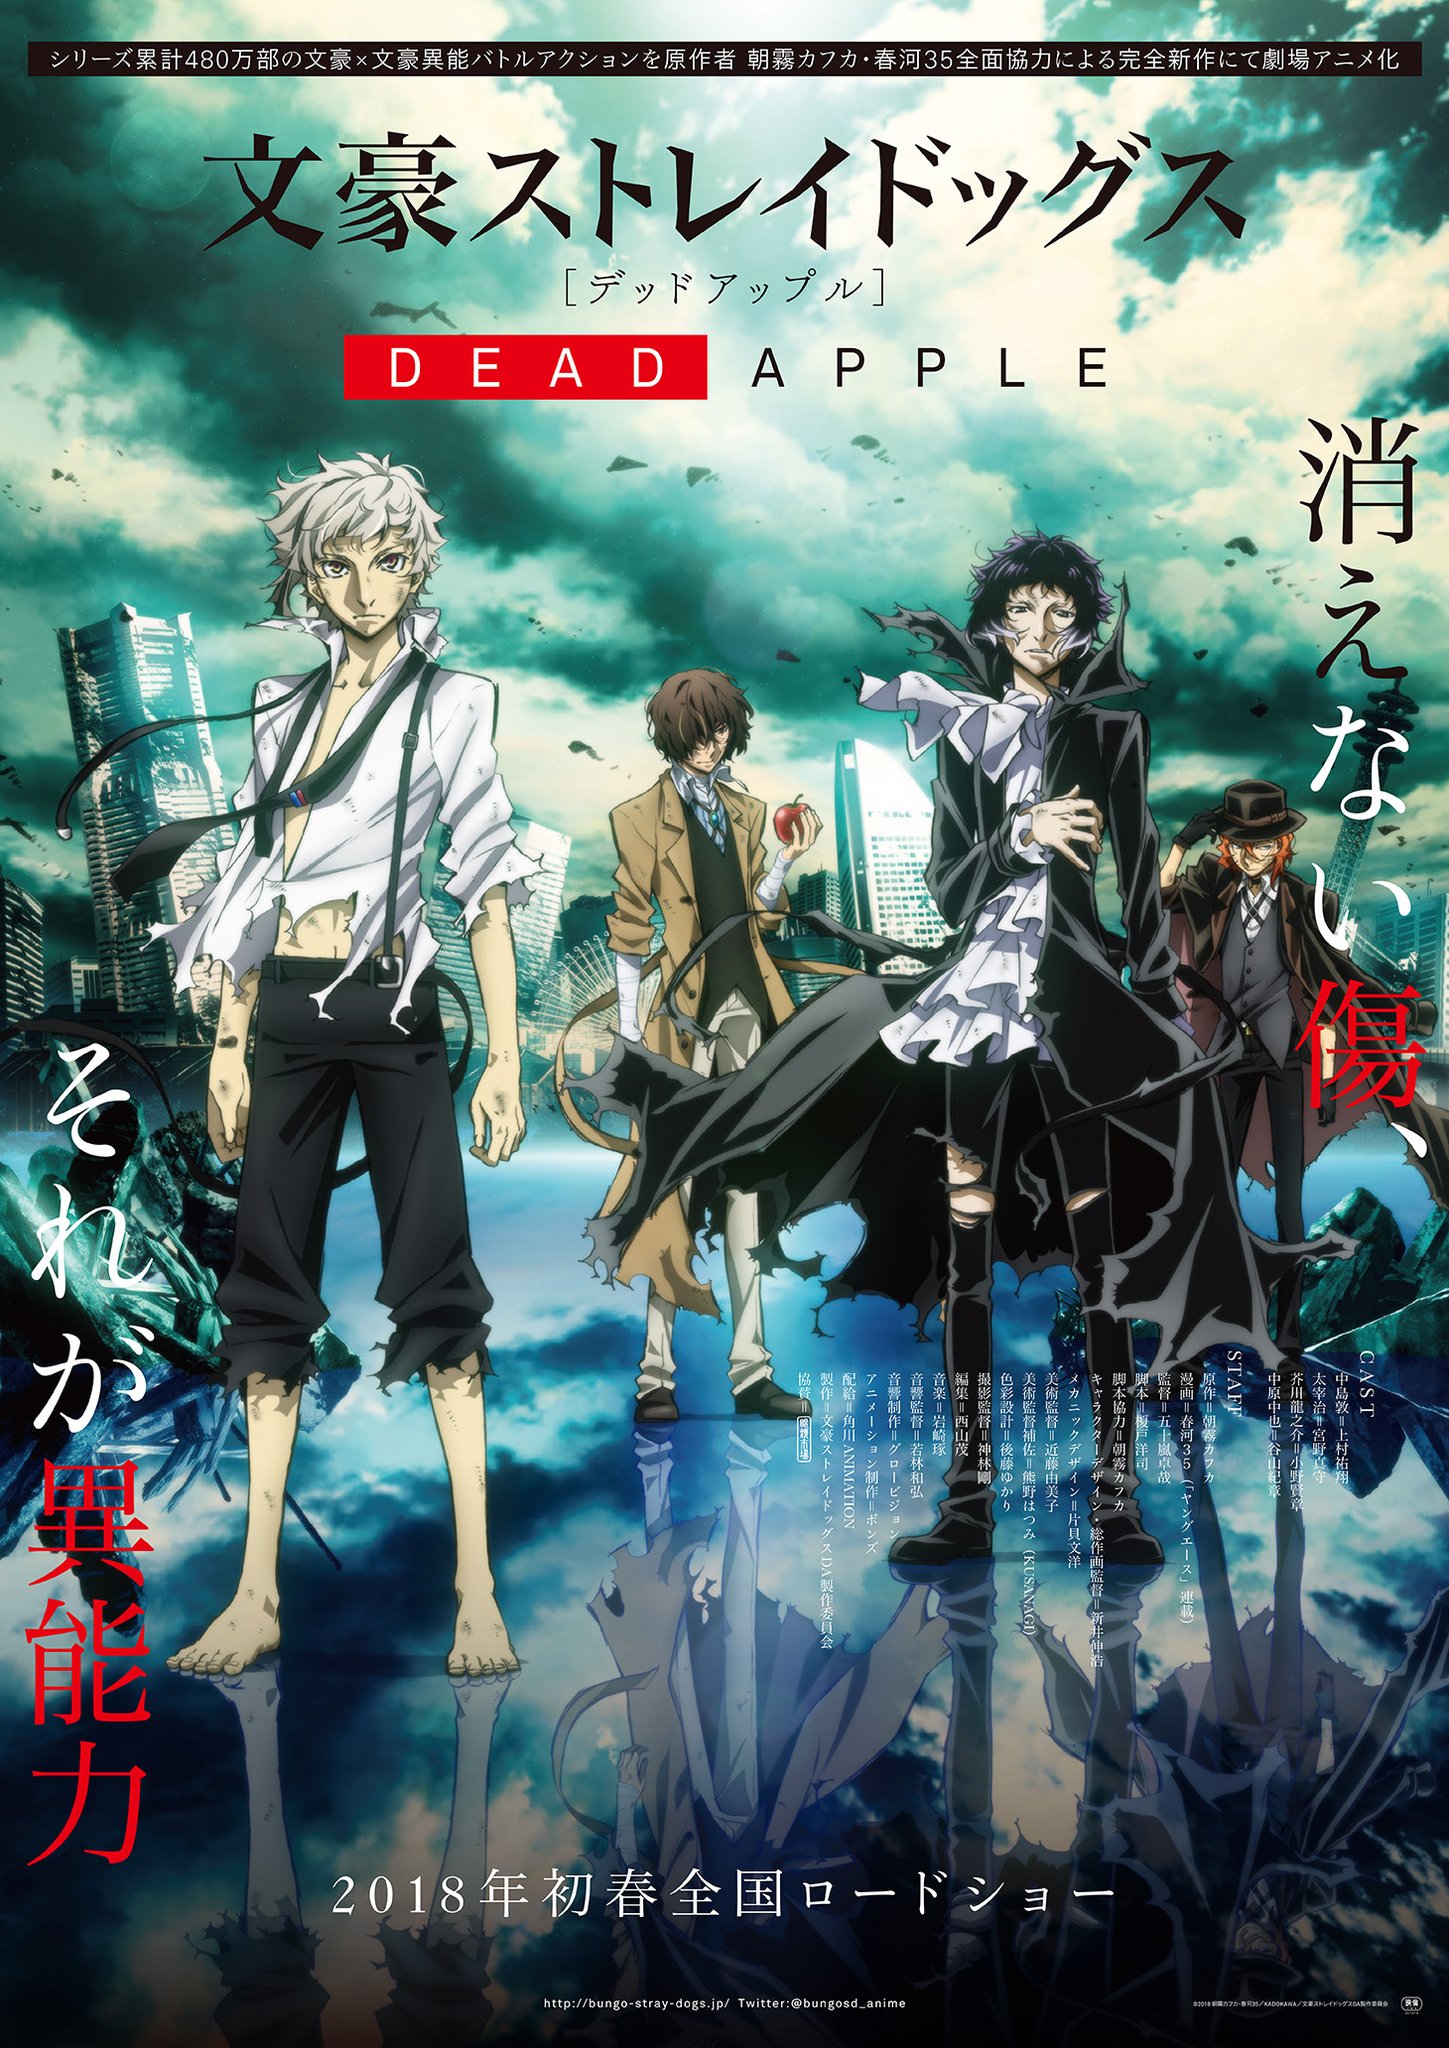 Pin by えリか on Bungou Stray Dogs  Stray dogs anime, Bungo stray dogs,  Bongou stray dogs